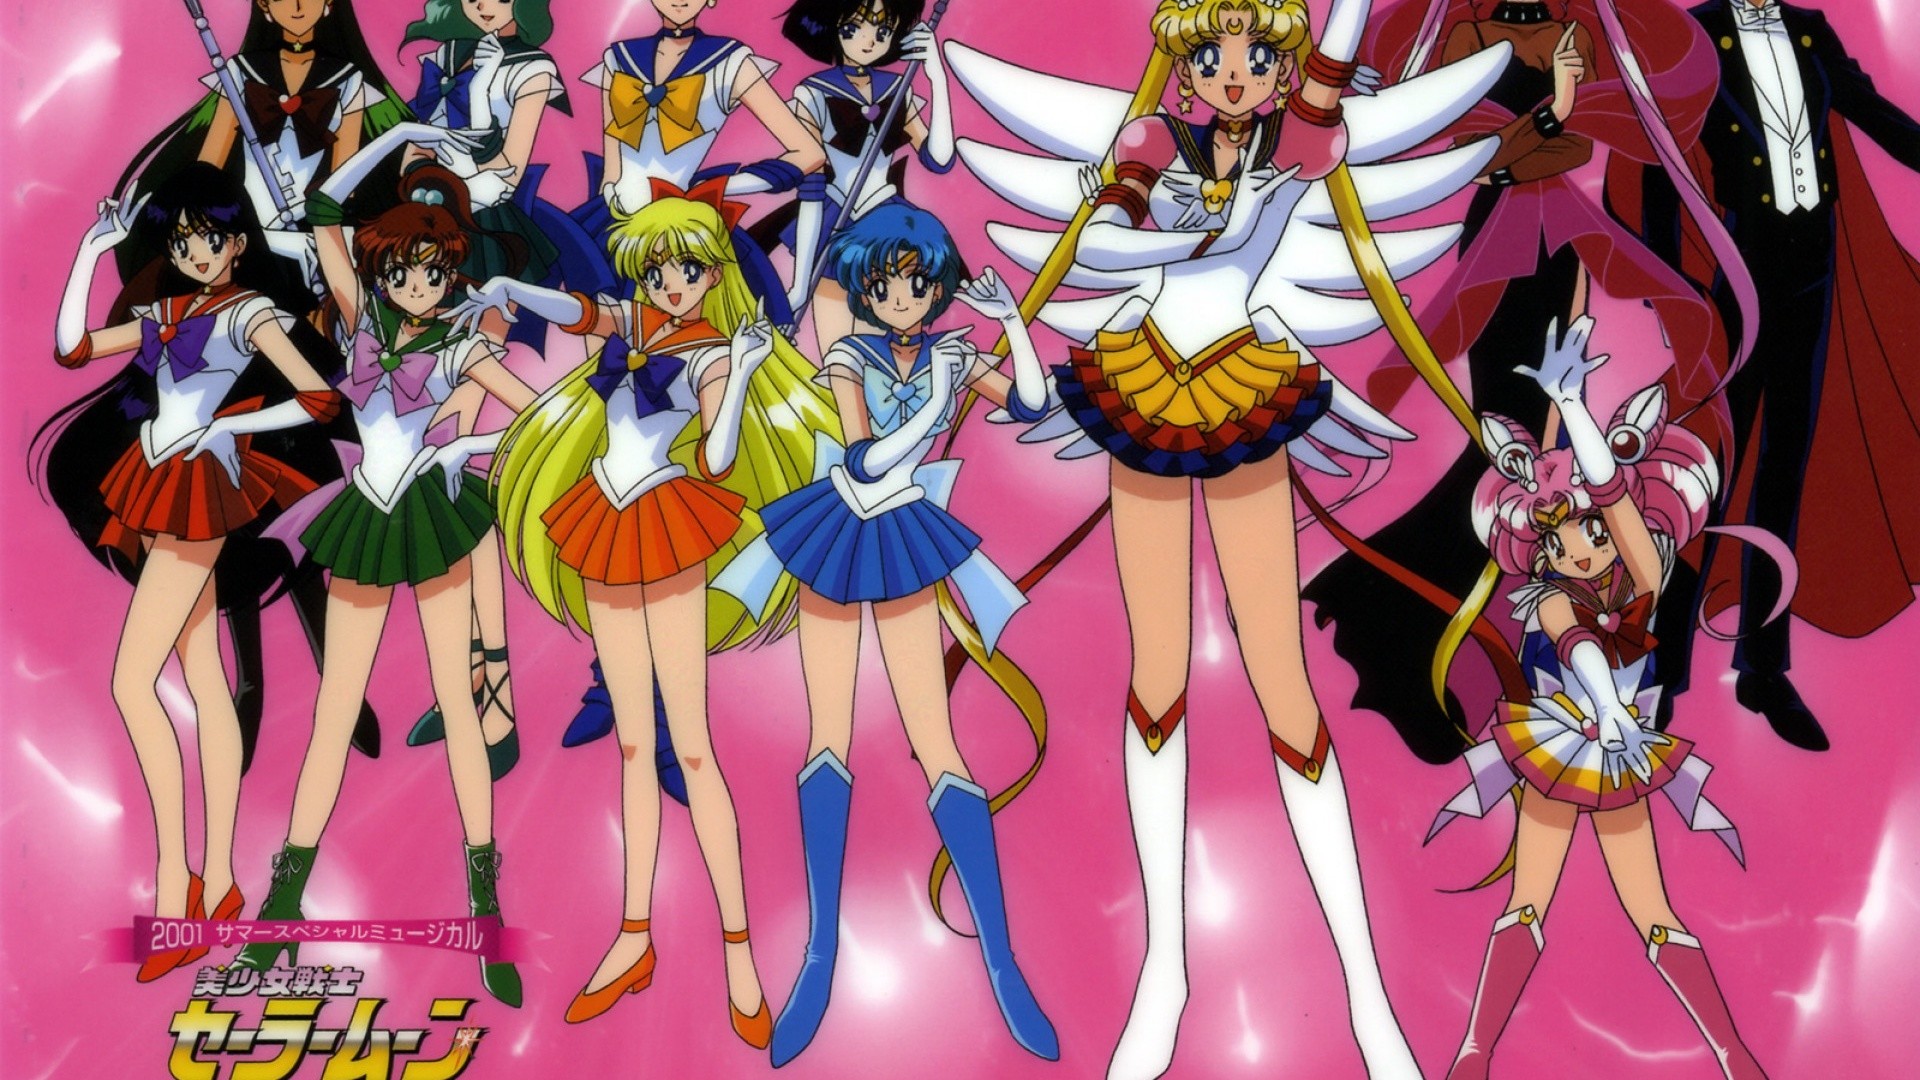 Sailor Moon 11. How to set wallpaper on your desktop Click the download link from above and set the wallpaper on the desktop from your OS